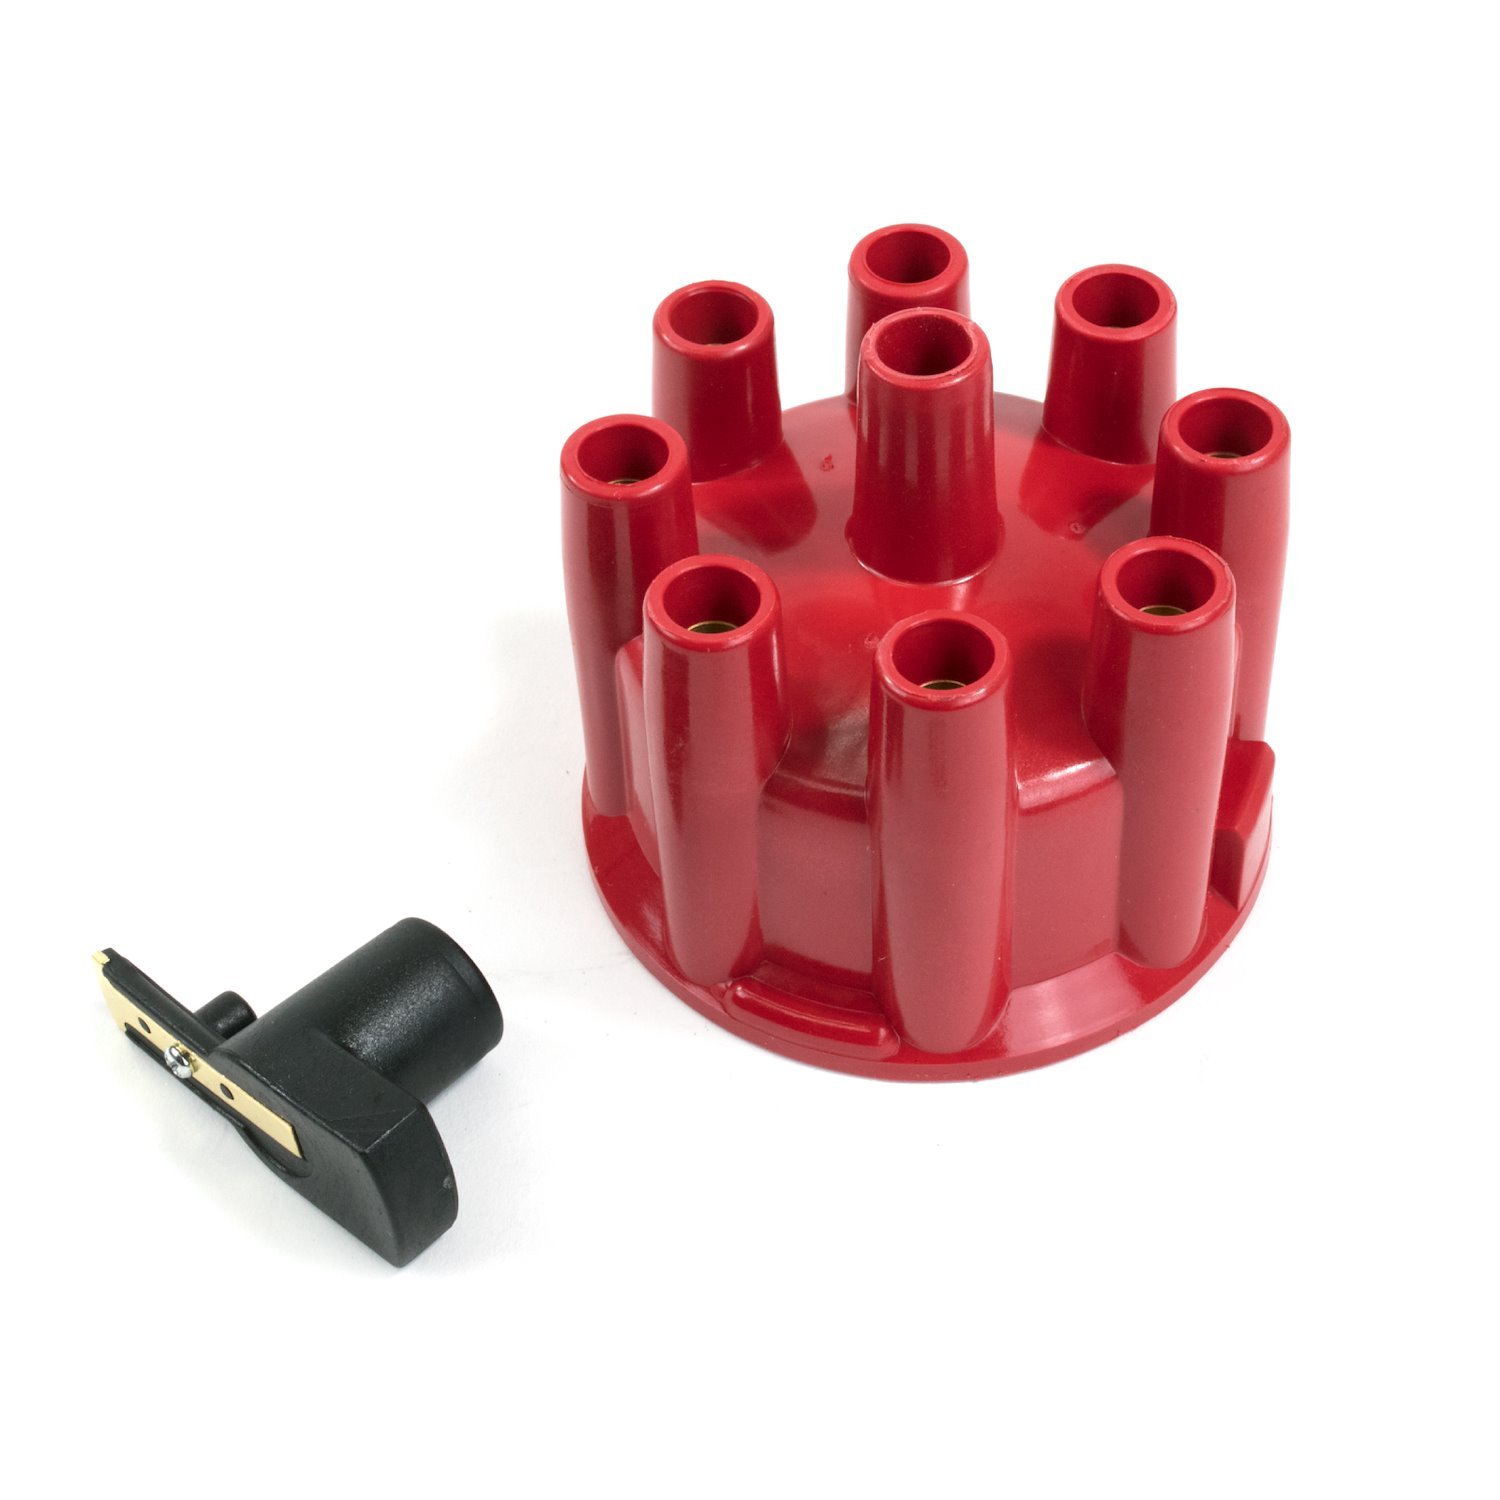 JM6972R Pro Billet & Ready-to-Run Distributor Cap and Rotor Kit, 8 Cyl Female, Red